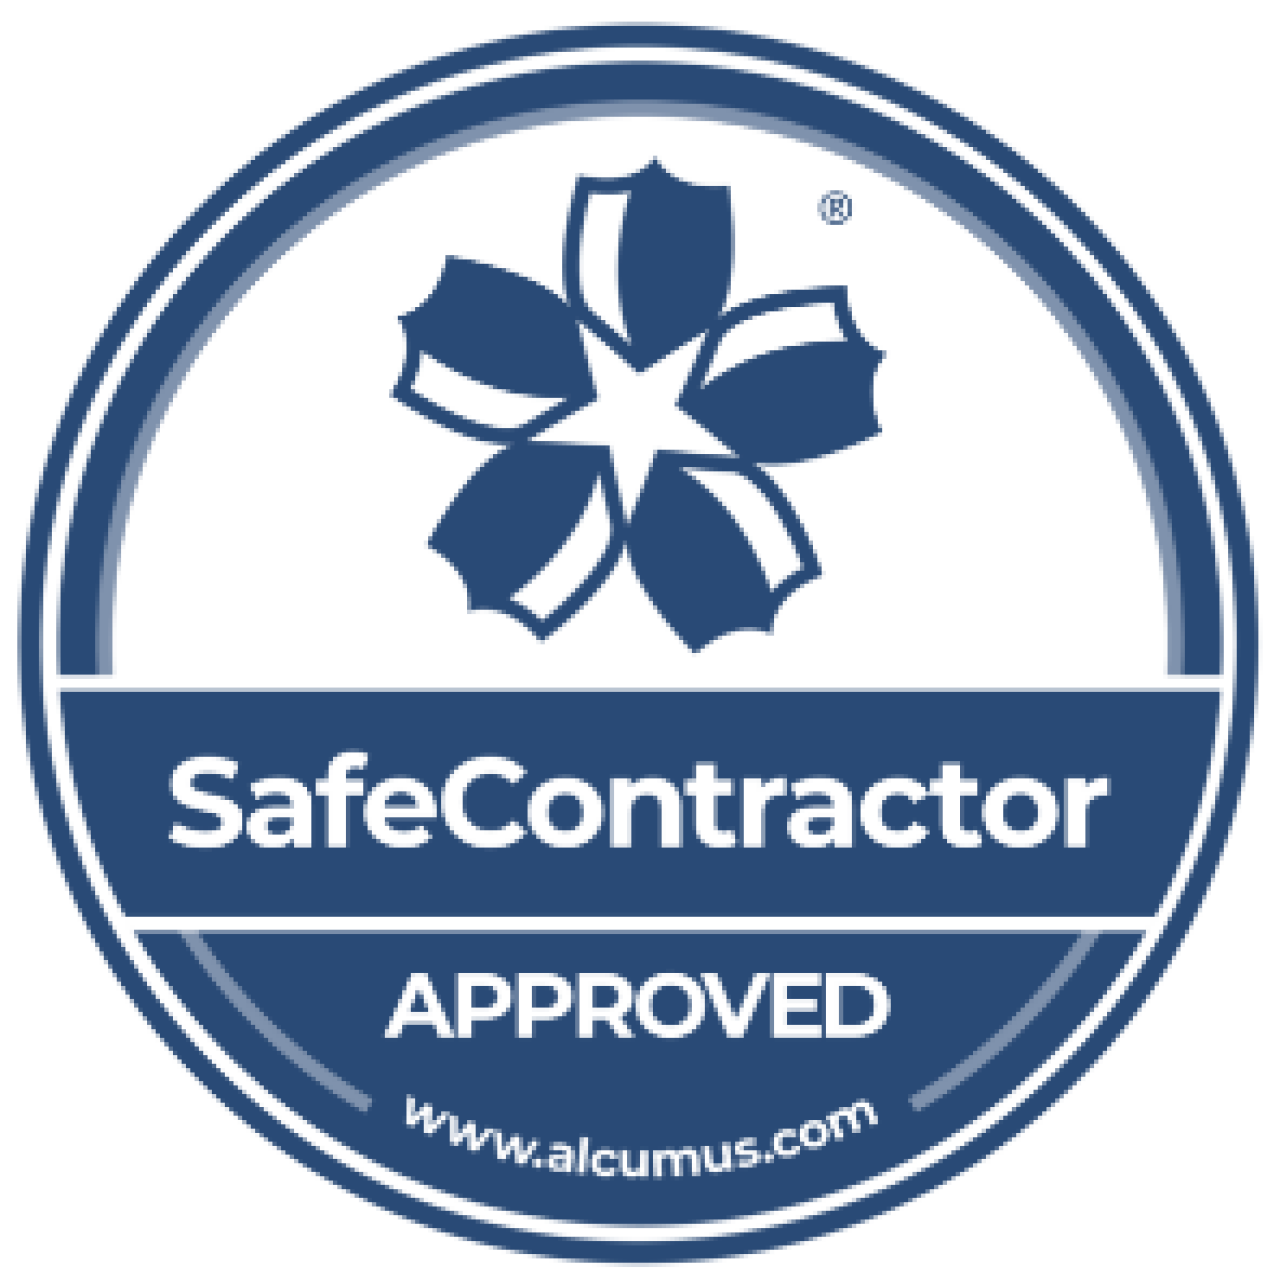 Safe Contractor accreditation.